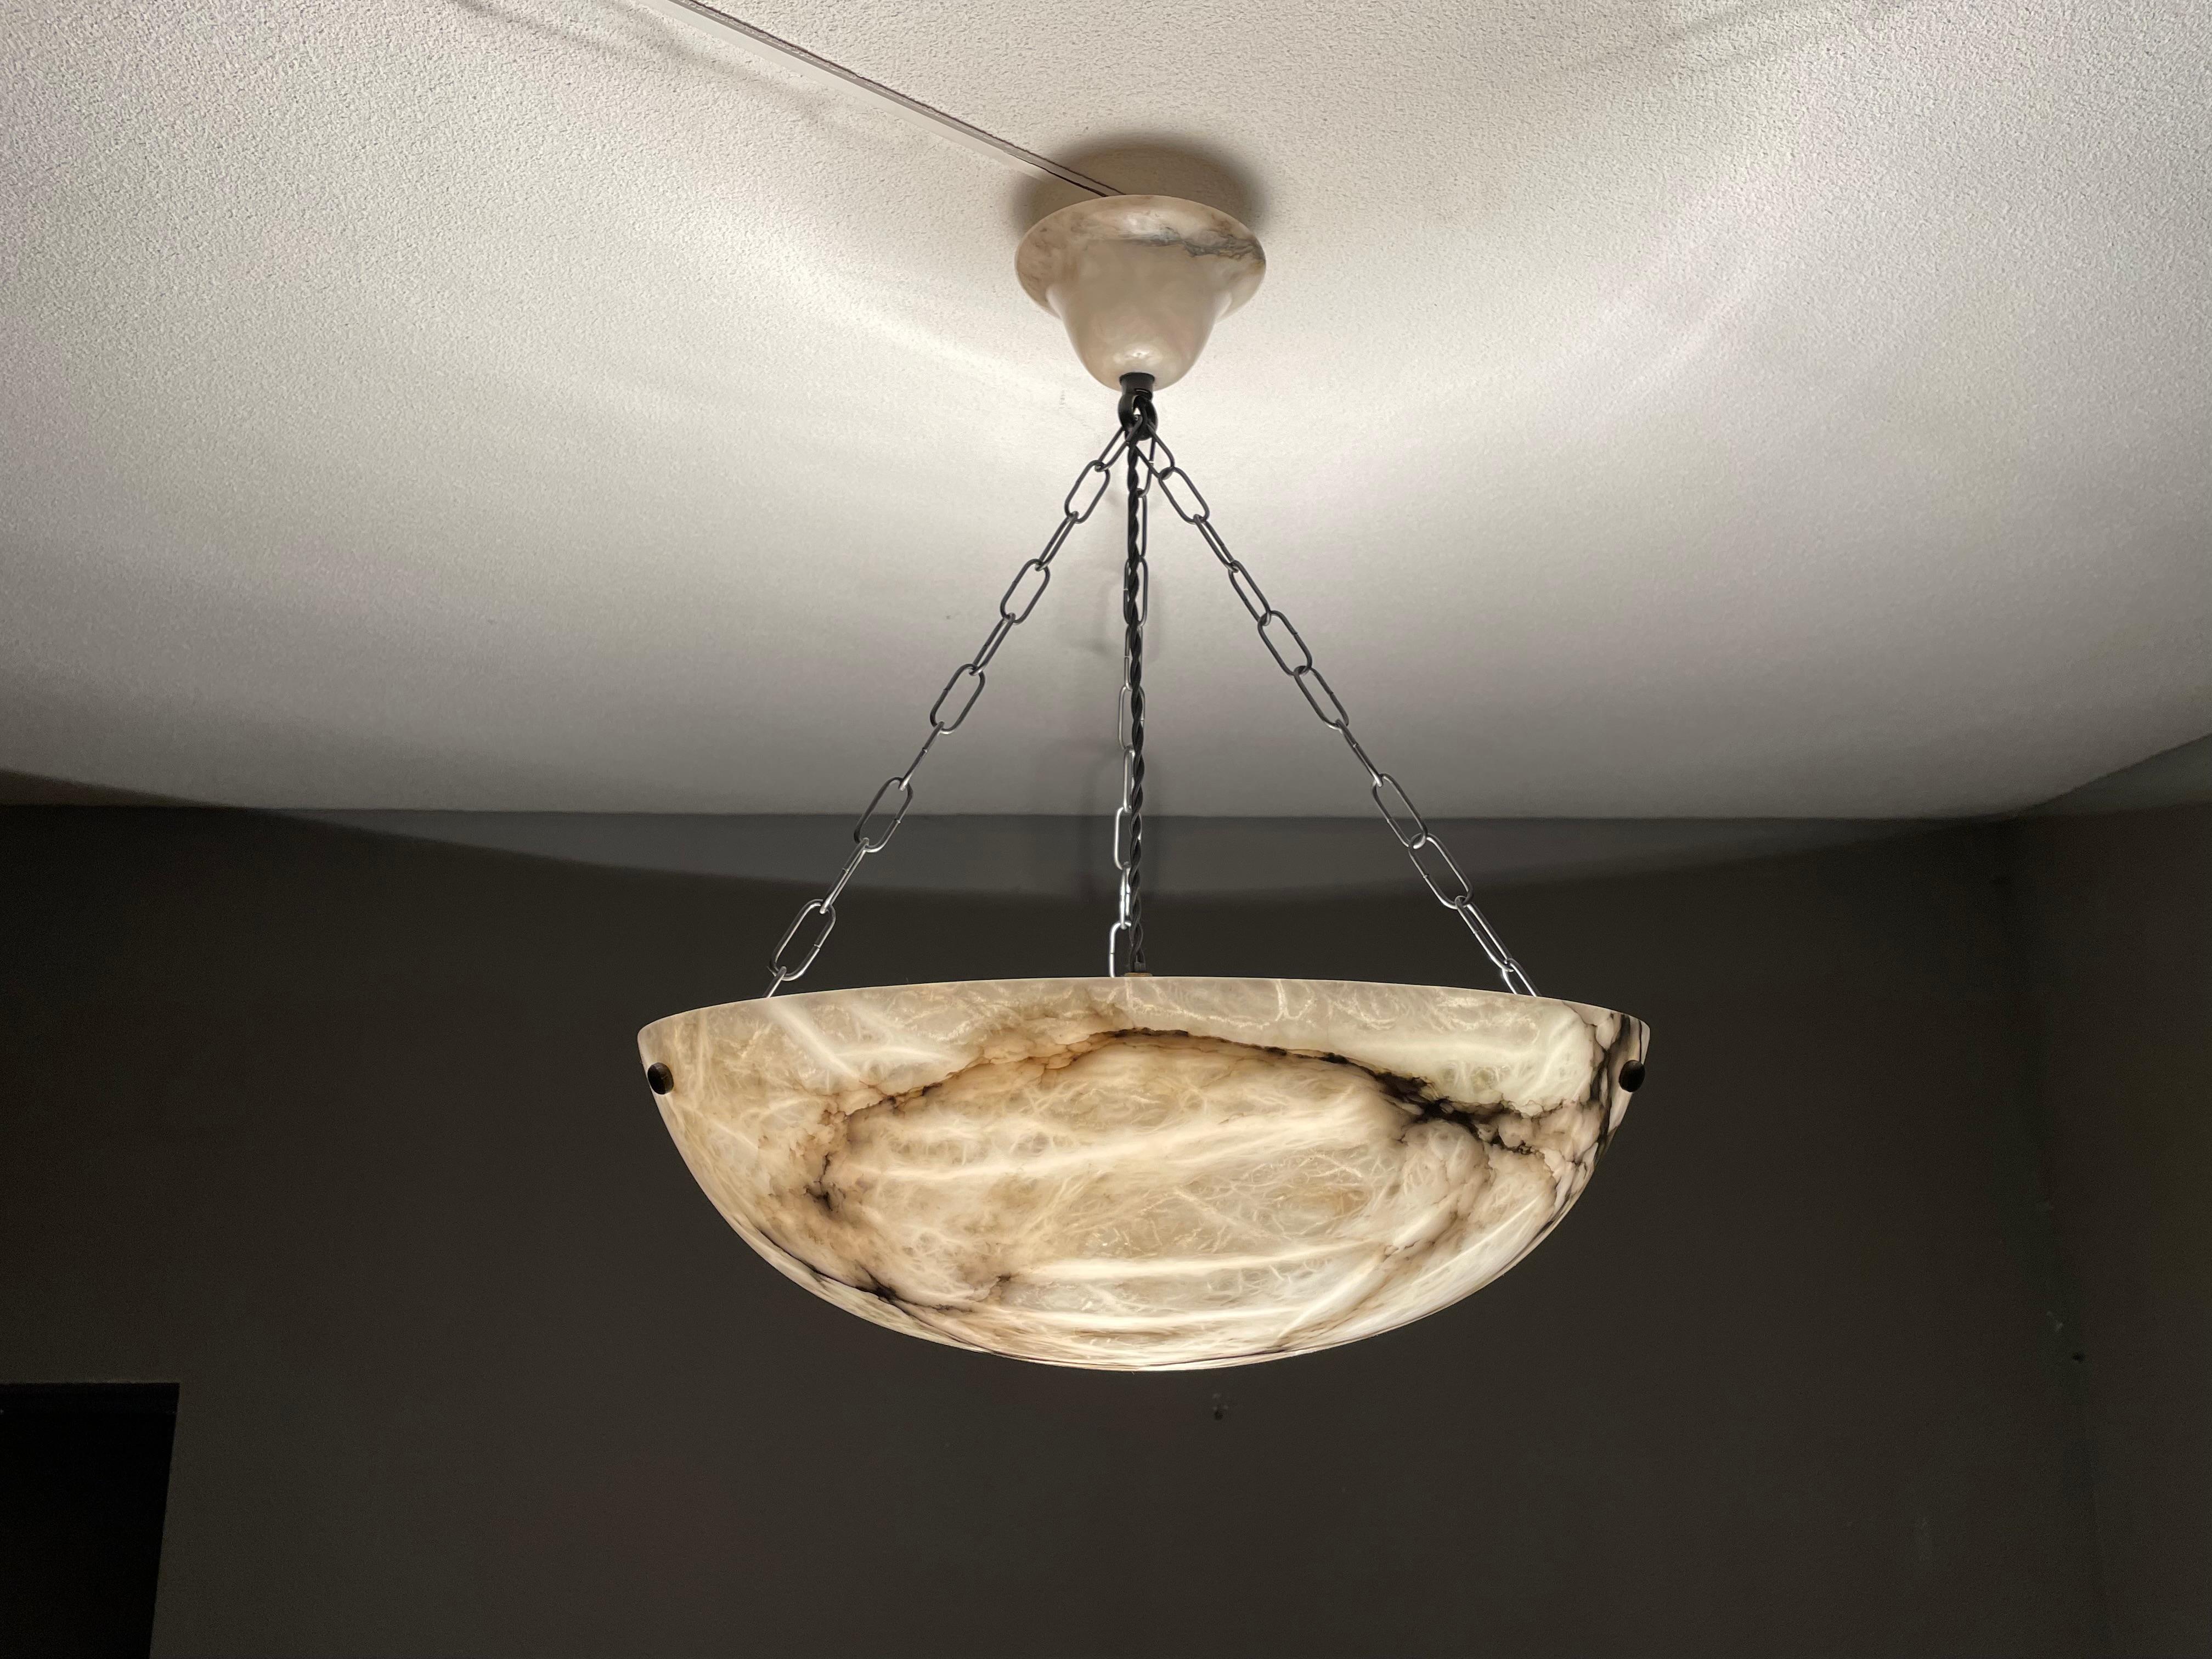 Superb condition marble-like chandelier with a stunning and great size alabaster mineral stone shade.

Thanks to its large size, its deep bowl shape and timeless design this alabaster chandelier is bound to light up both your days and evenings. It